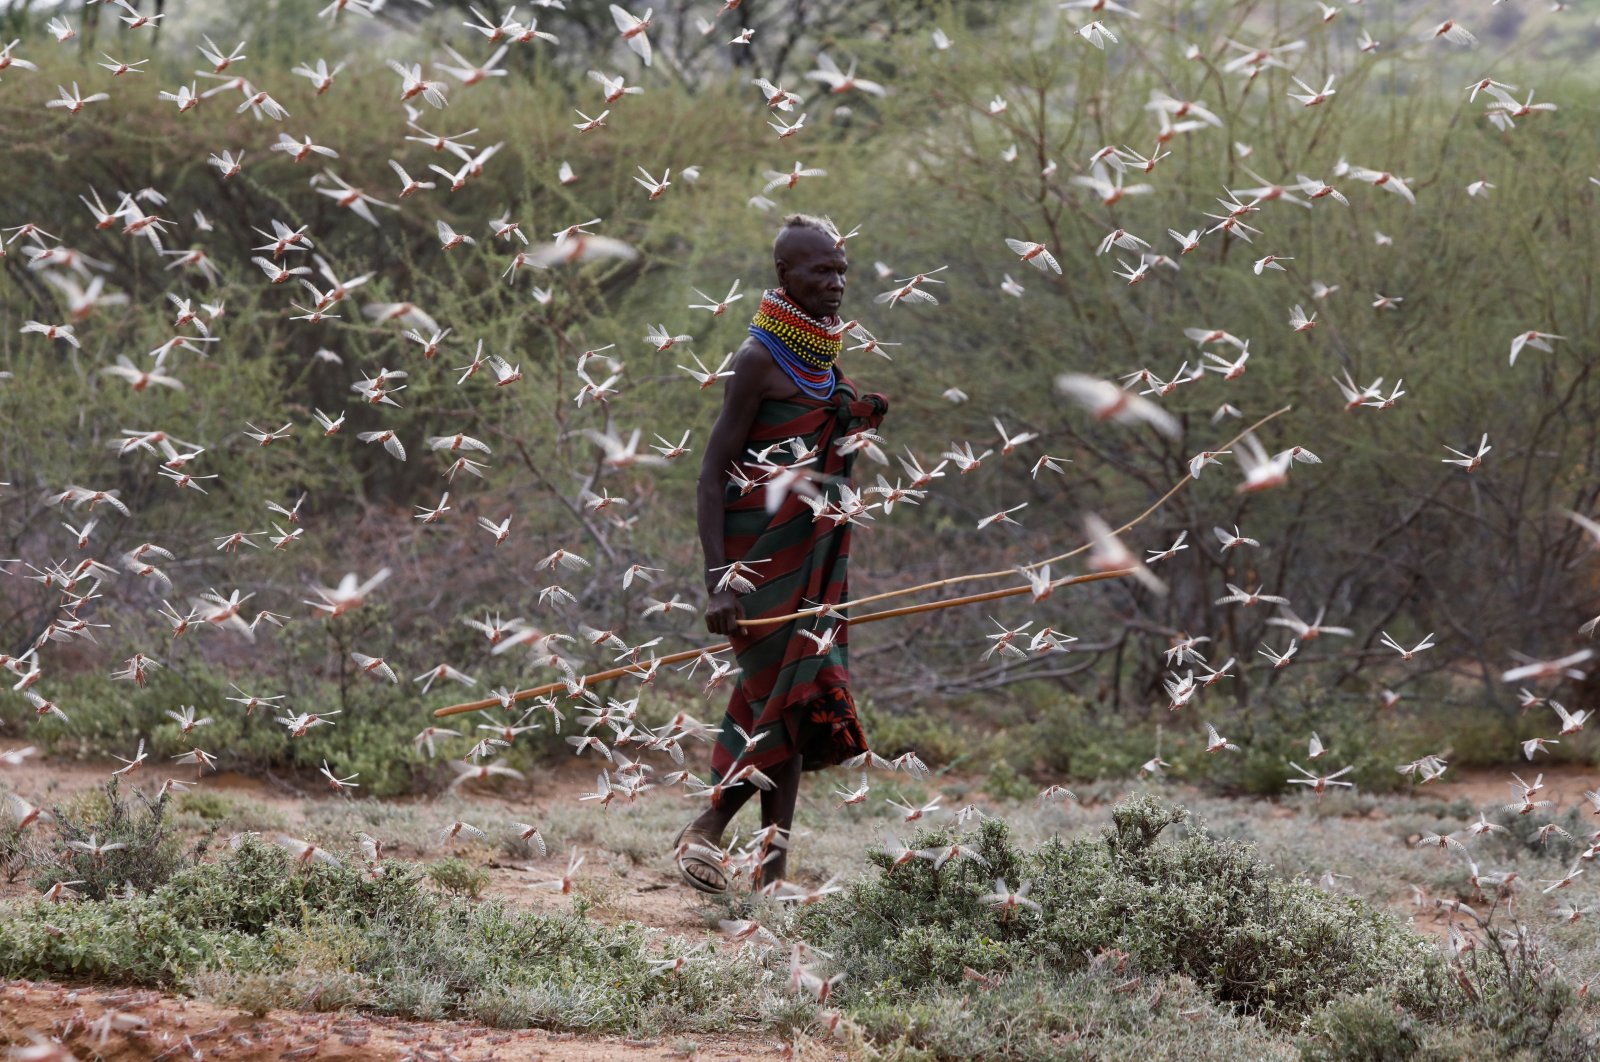 A member of the Turkana tribe walks through a swarm of desert locusts in the village of Lorengippi near the town of Lodwar, Turkana county, Kenya, July 2, 2020. (REUTERS Photo)